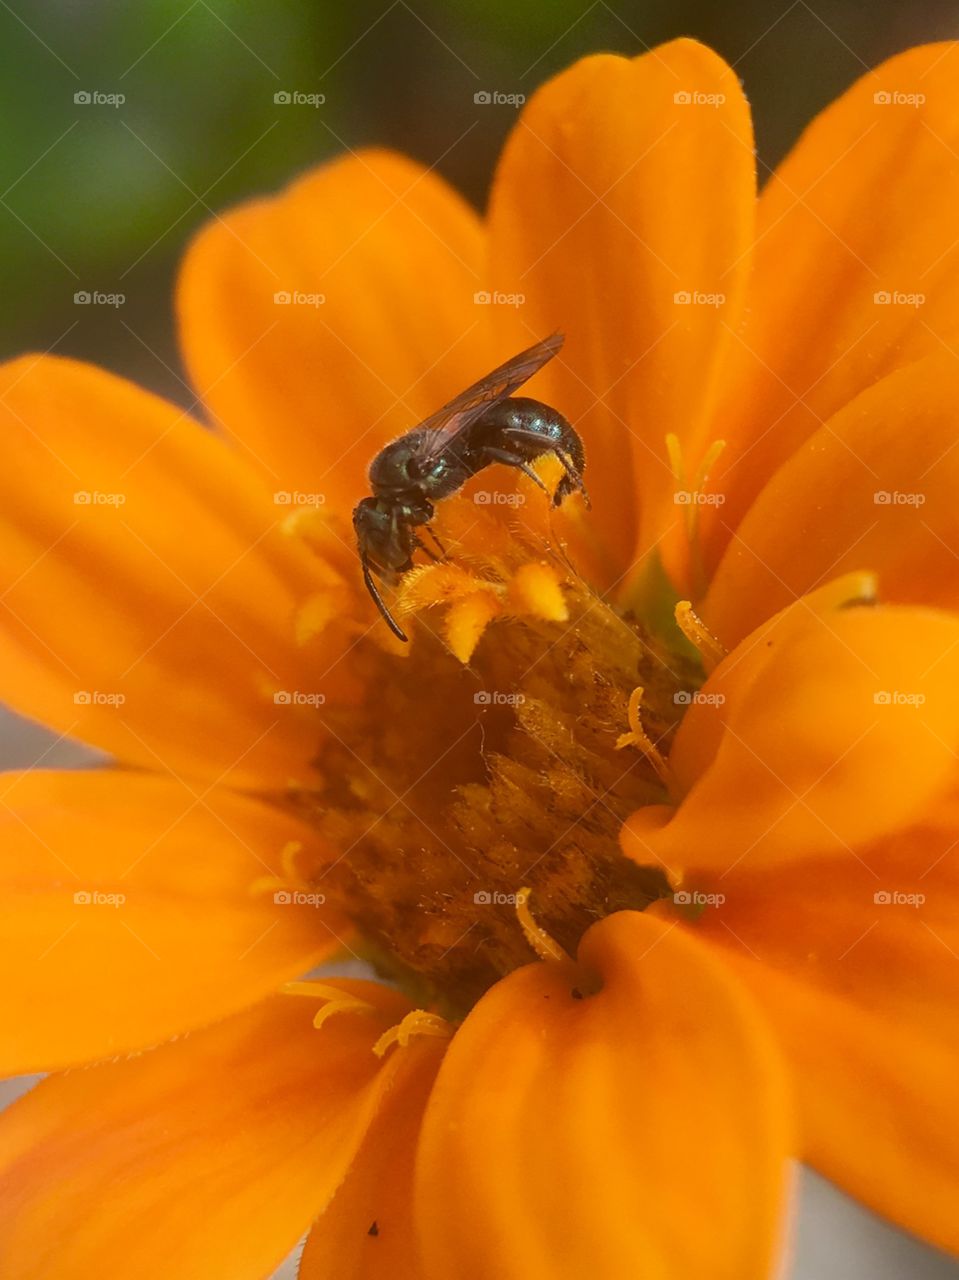 Stingless bee looking for food